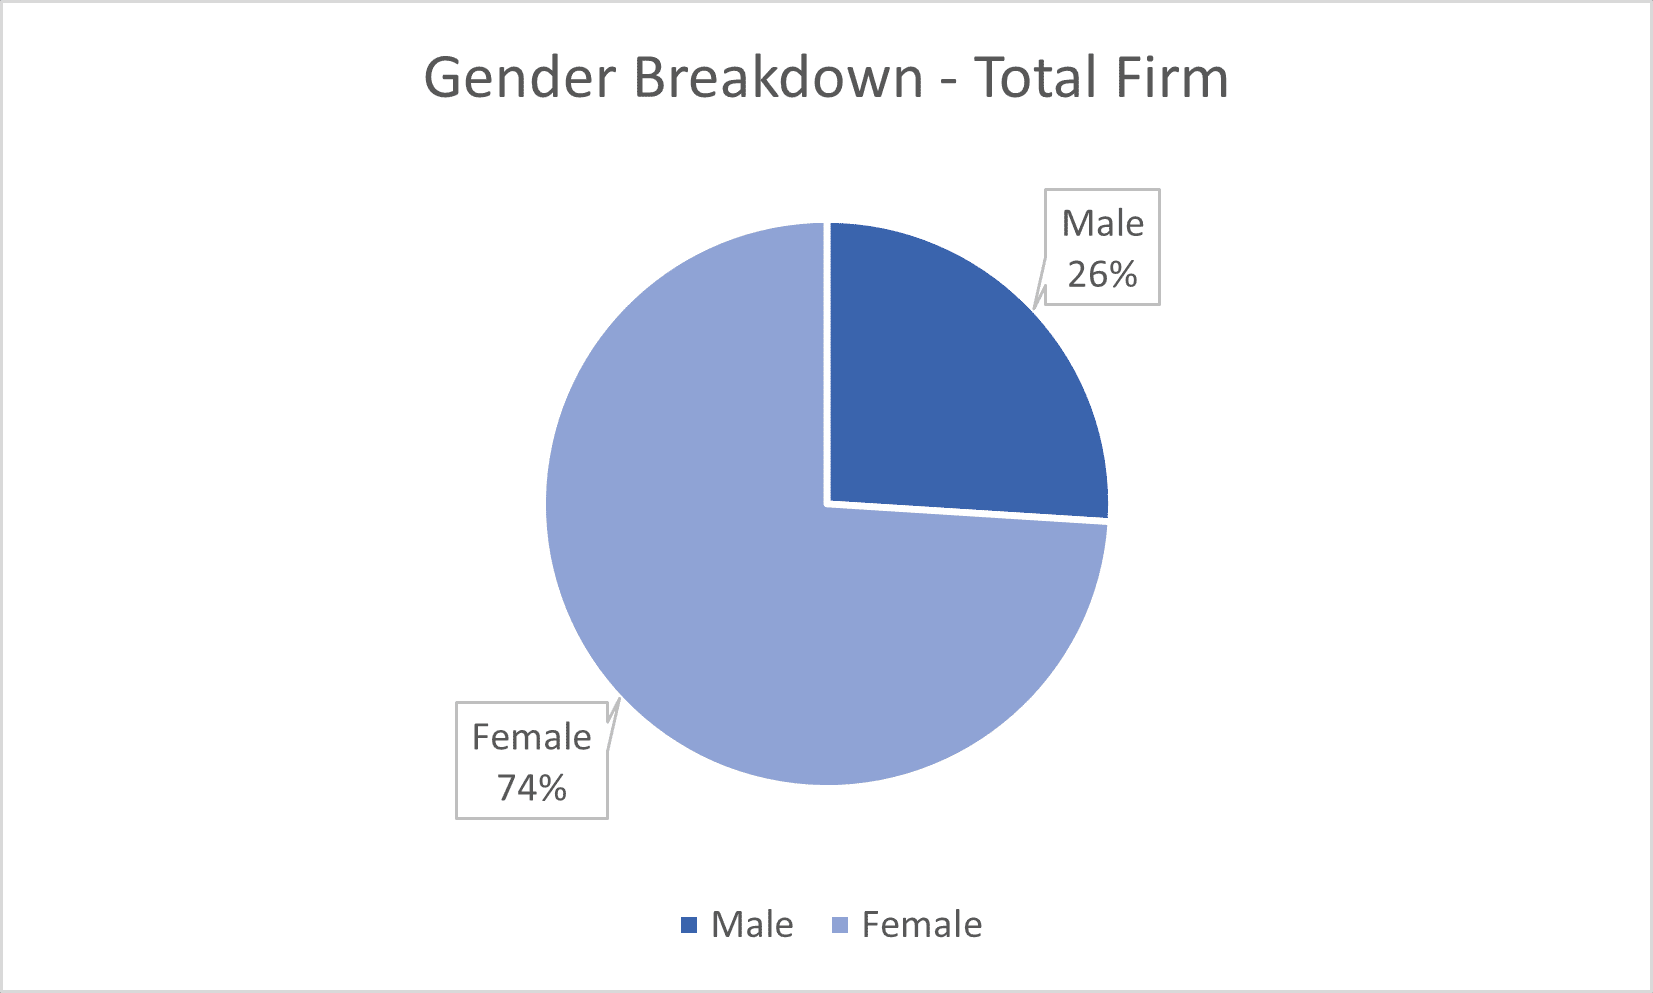 Pie chart showing the gender breakdown of the firm, 26% male and 74% female